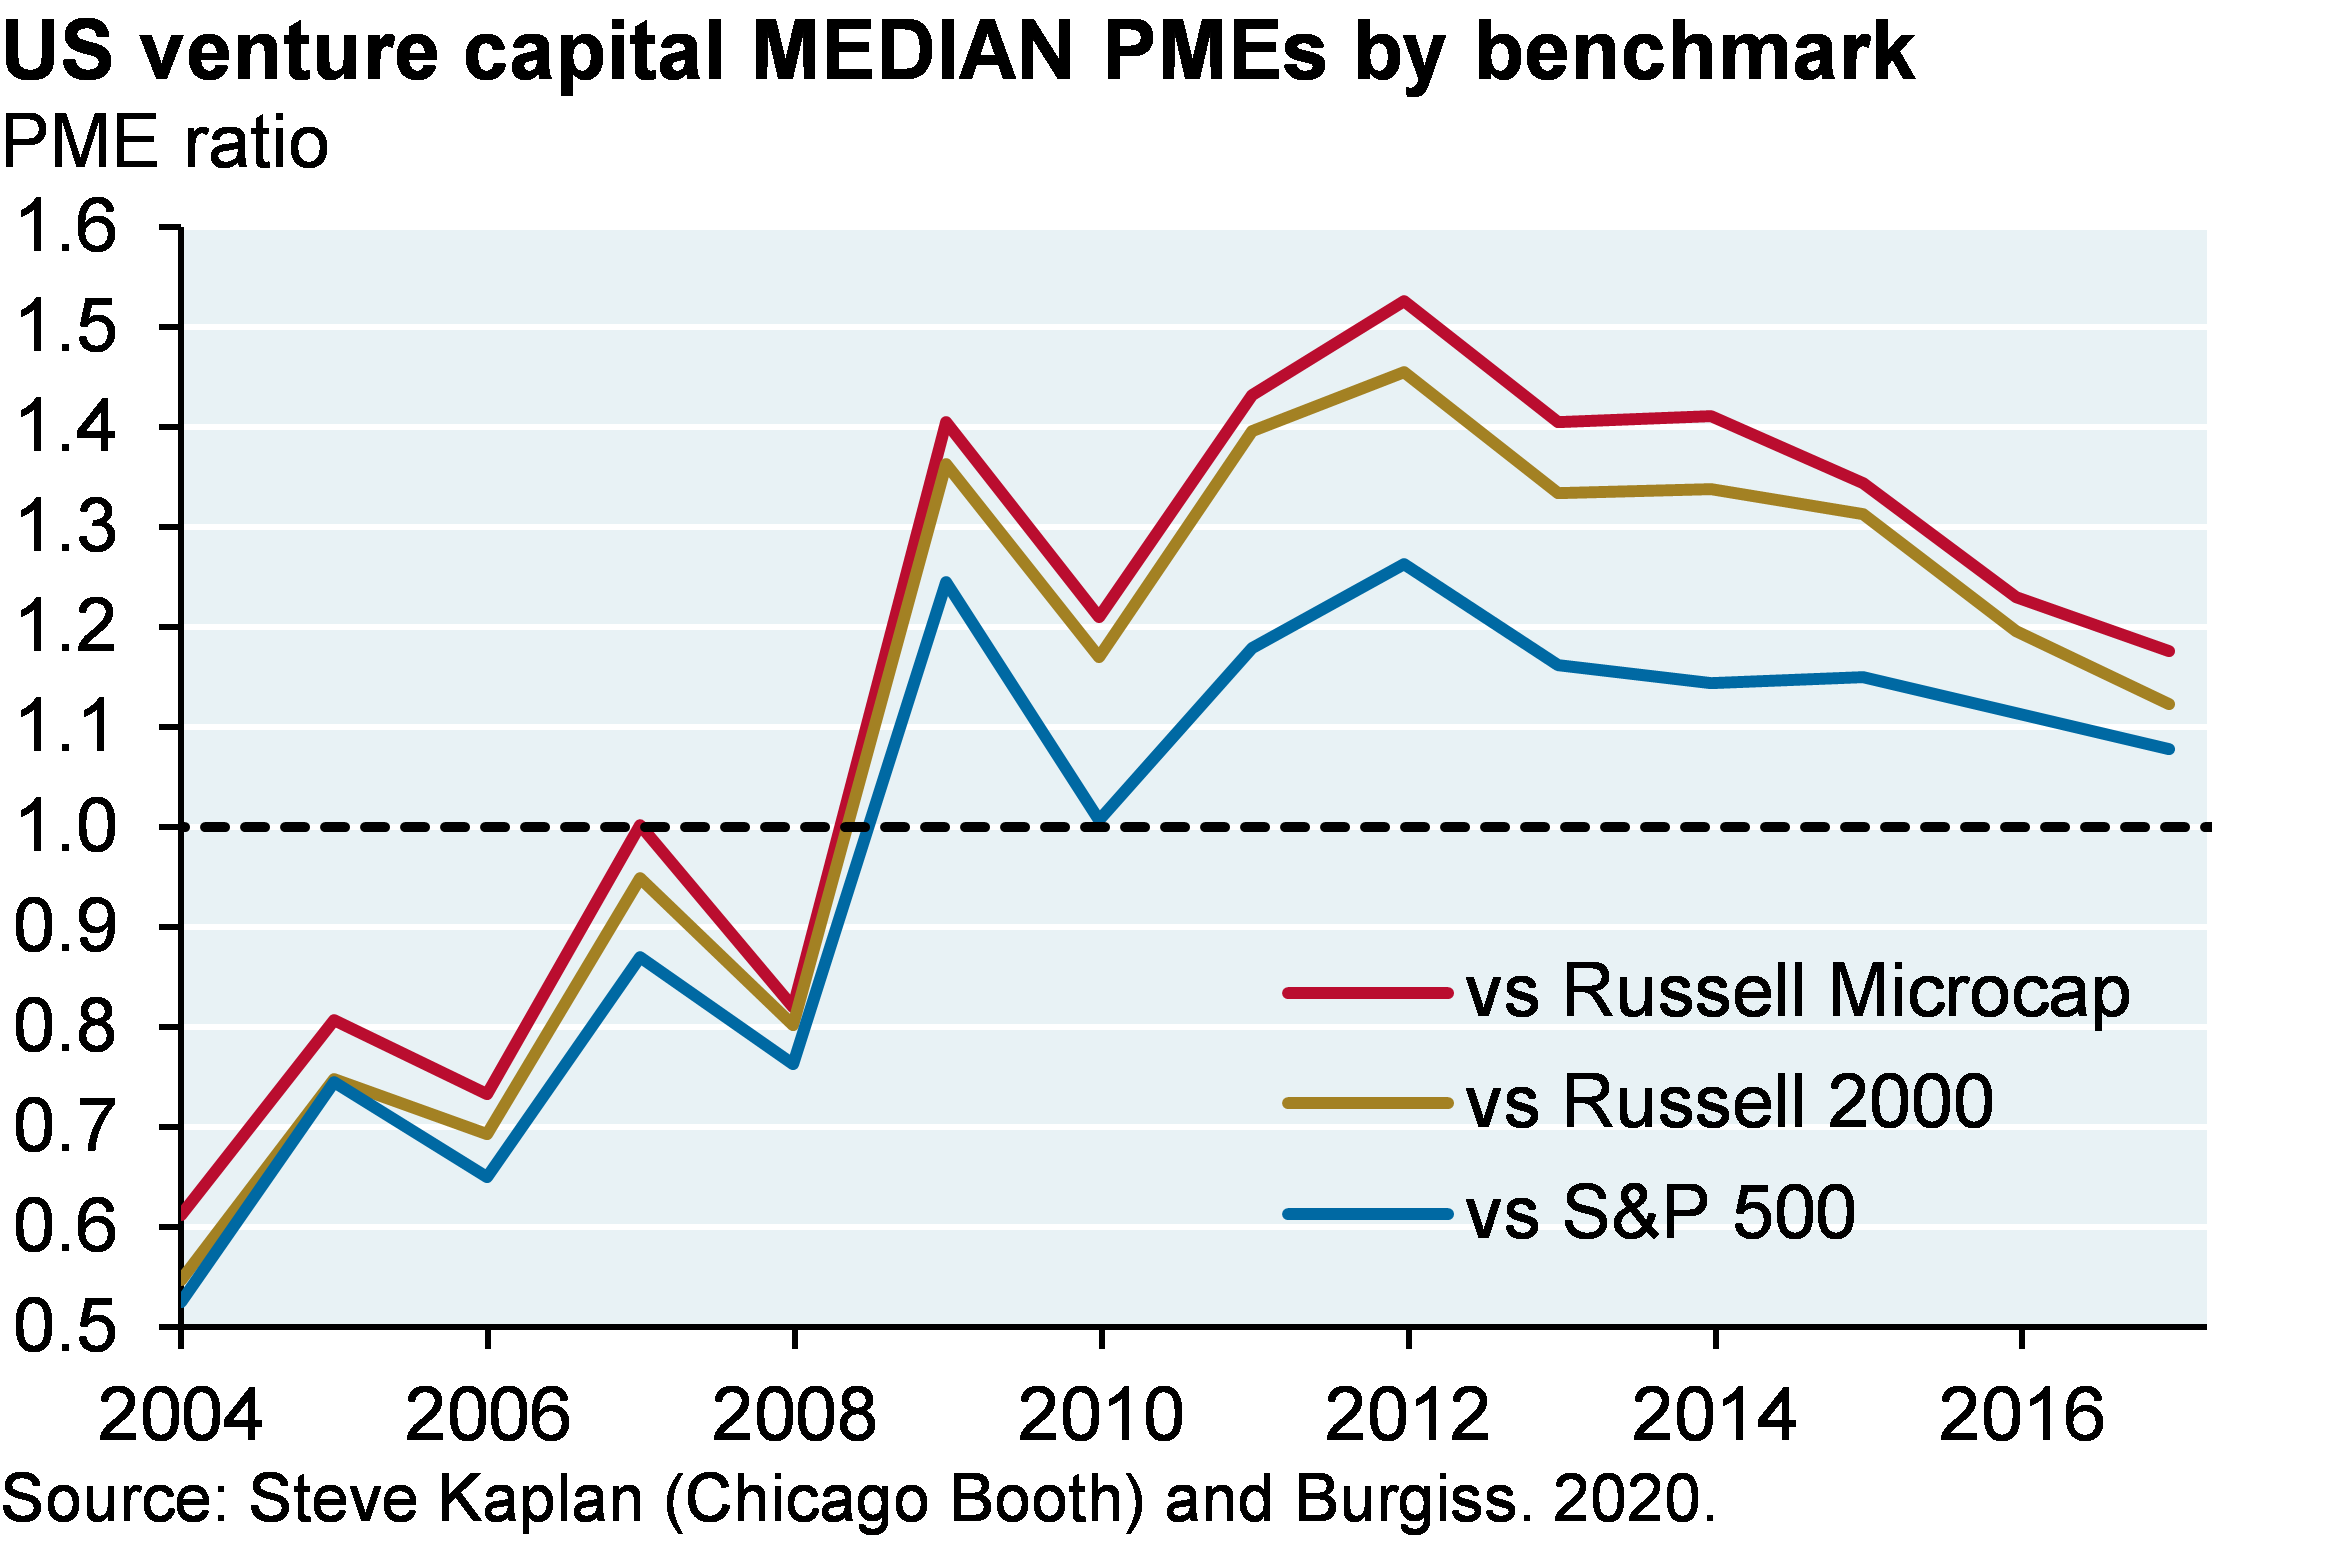 Line chart shows US venture capital median PMEs, showing the PME vs the Russell Microcap, the Russell 2000, and the S&P 500. A PME above 1 indicates that the venture capital performance outperformed the benchmark. Since 2004, the PME ratios for all benchmarks steadily increased from around 0.6 to around 1.5 in 2012. Since then the PME ratios have declined to around 1.1-1.2. Over time, the PME vs Russell Microcap has been slightly higher than the PME vs Russell 2000. There has been a wider gap between the PME vs Russell 2000 and the PME vs S&P 500. In 2012, the PME vs S&P 500 was 1.25 compared to 1.45 vs the Russsell 2000. However, the gap has recently narrowed, with both the PME vs Russell 2000 and the PME vs S&P 500 at around 1.1